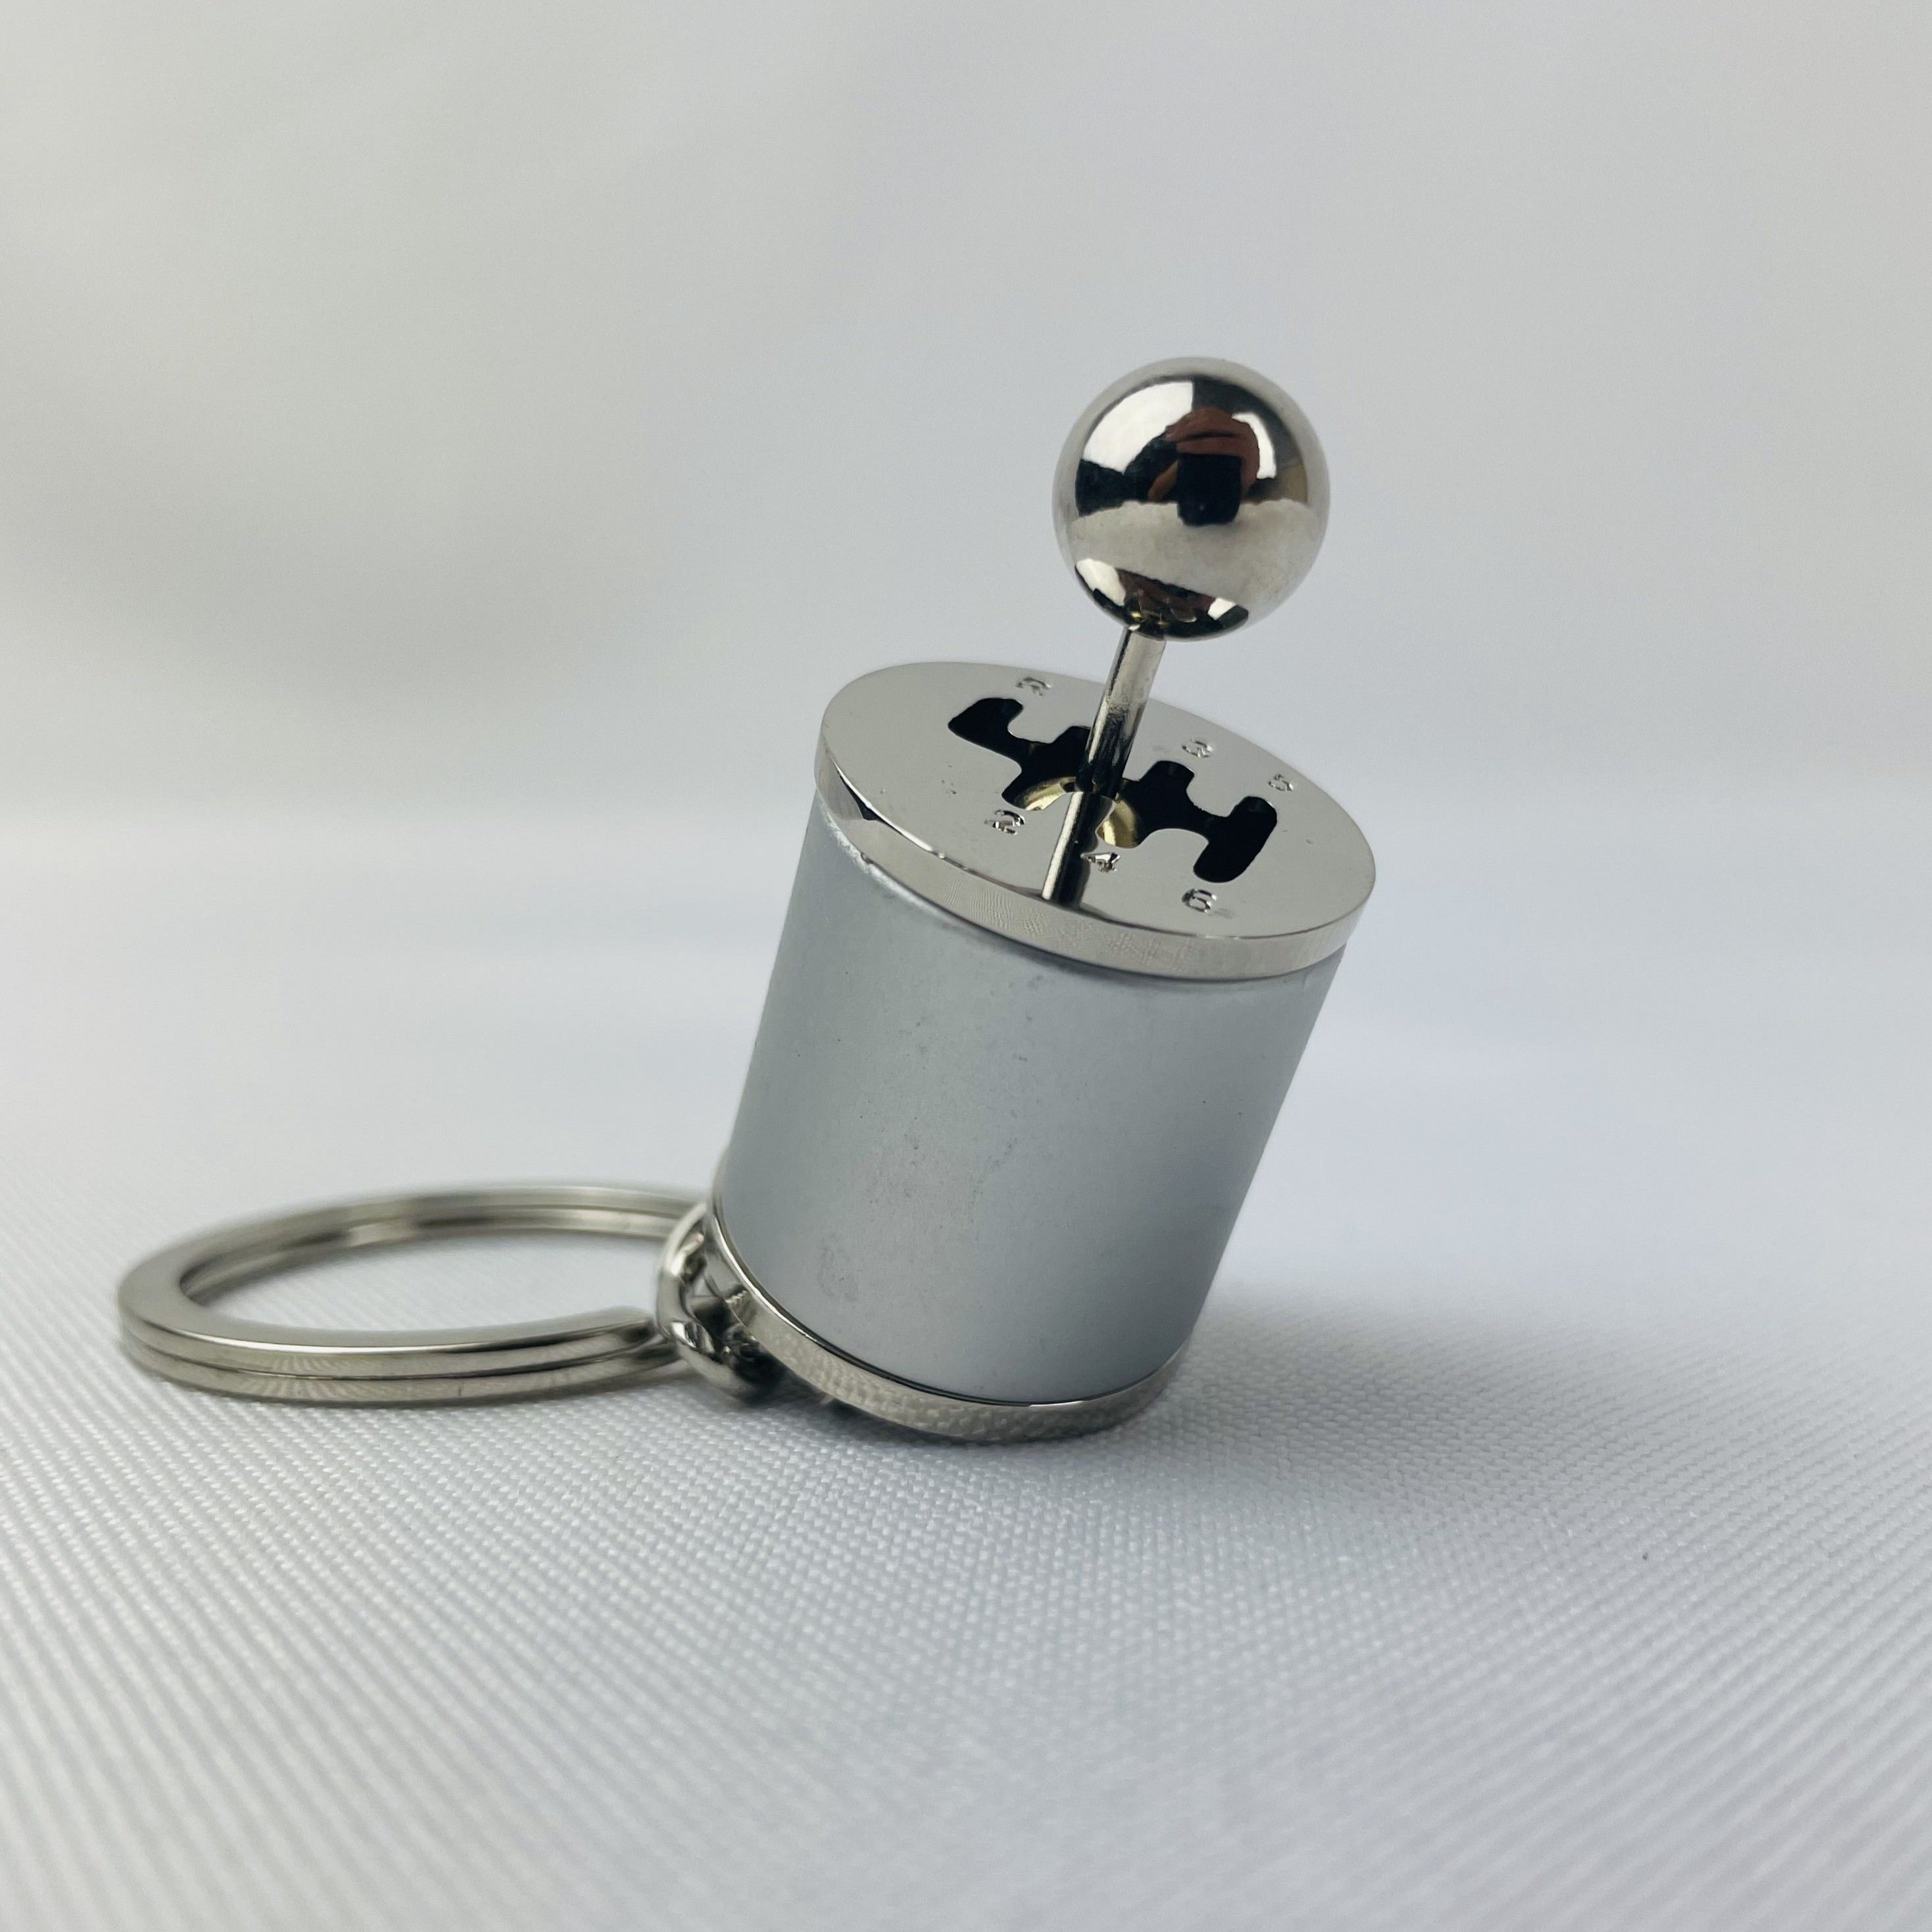 A 6 speed silver manual gear-shifter keychain. You are able to shift into every gear. Displayed sitting up with a white background.